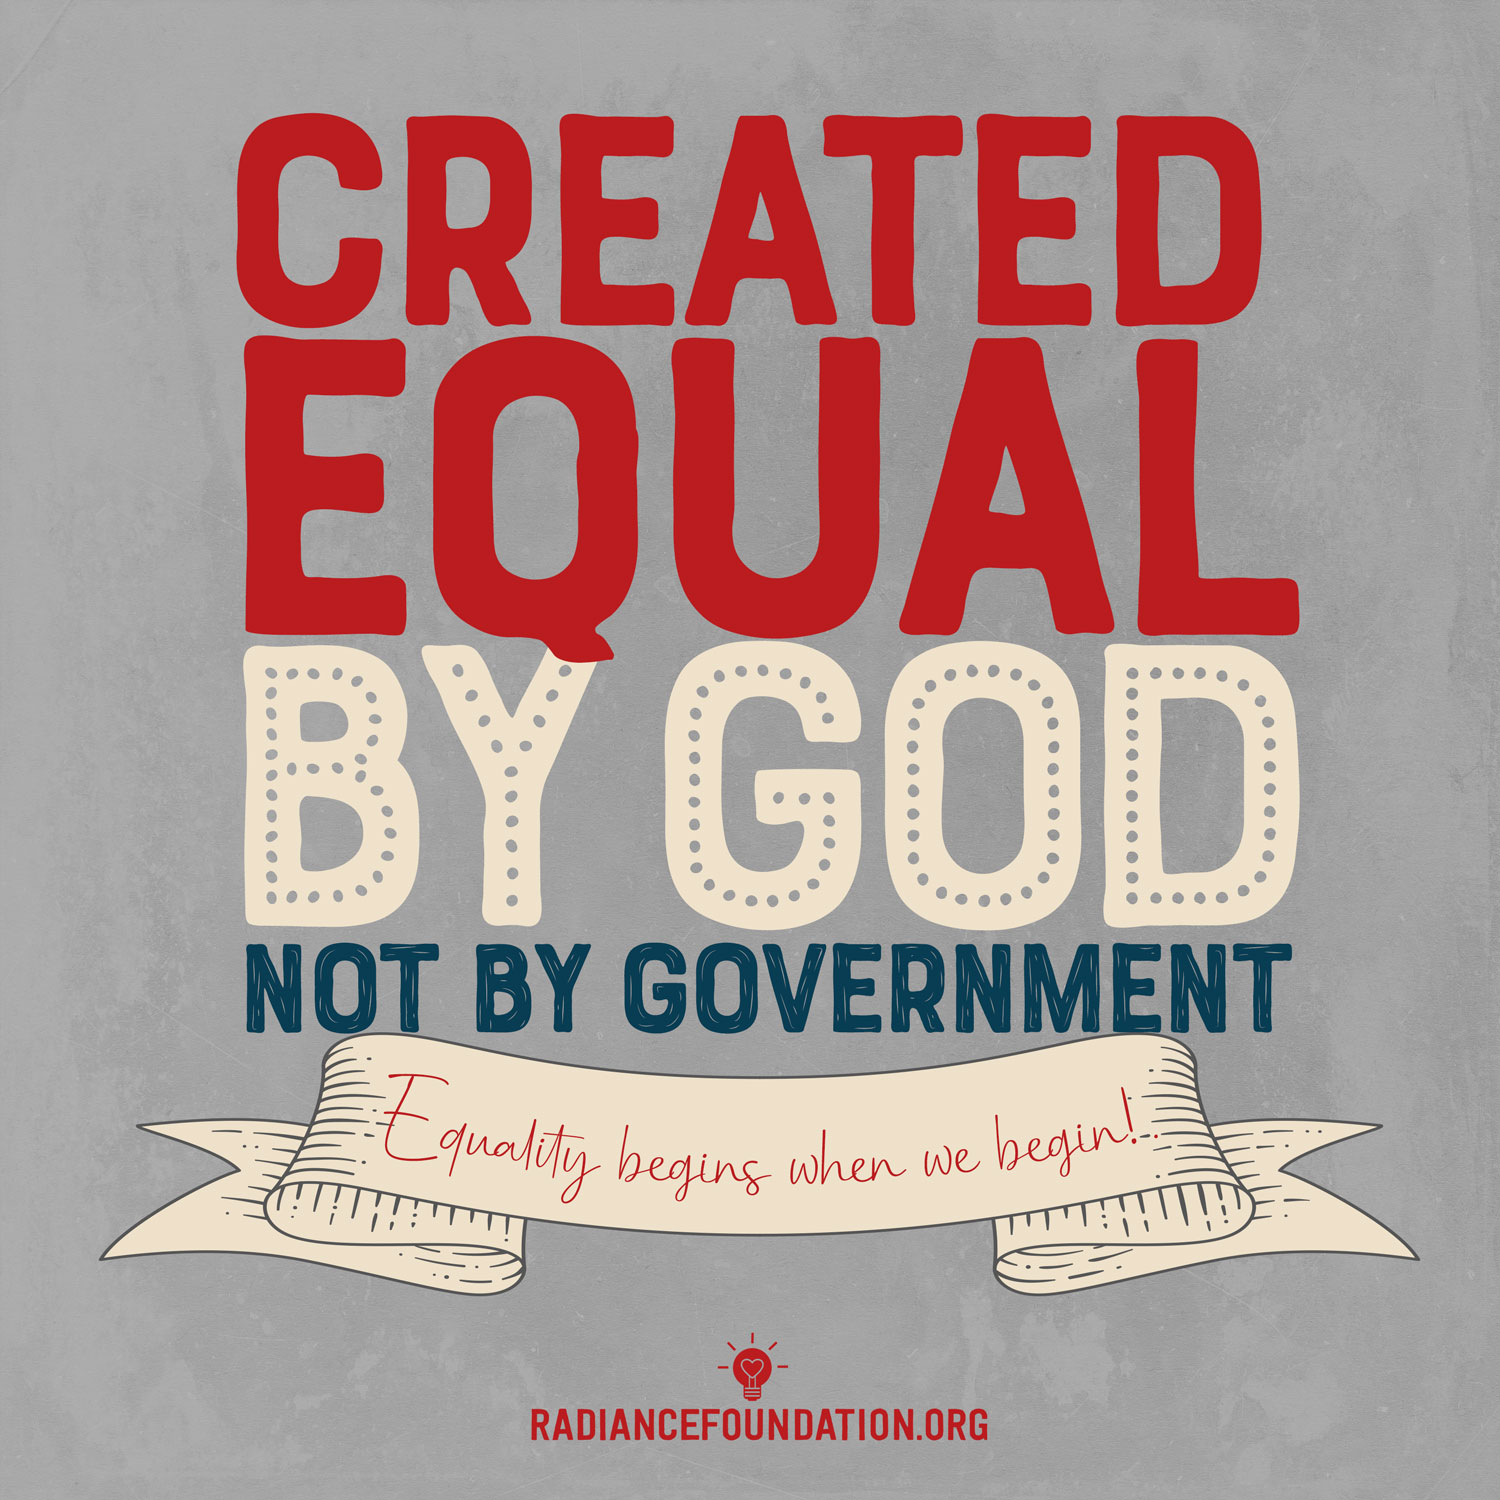 "Created Equal by God" - The Radiance Foundation